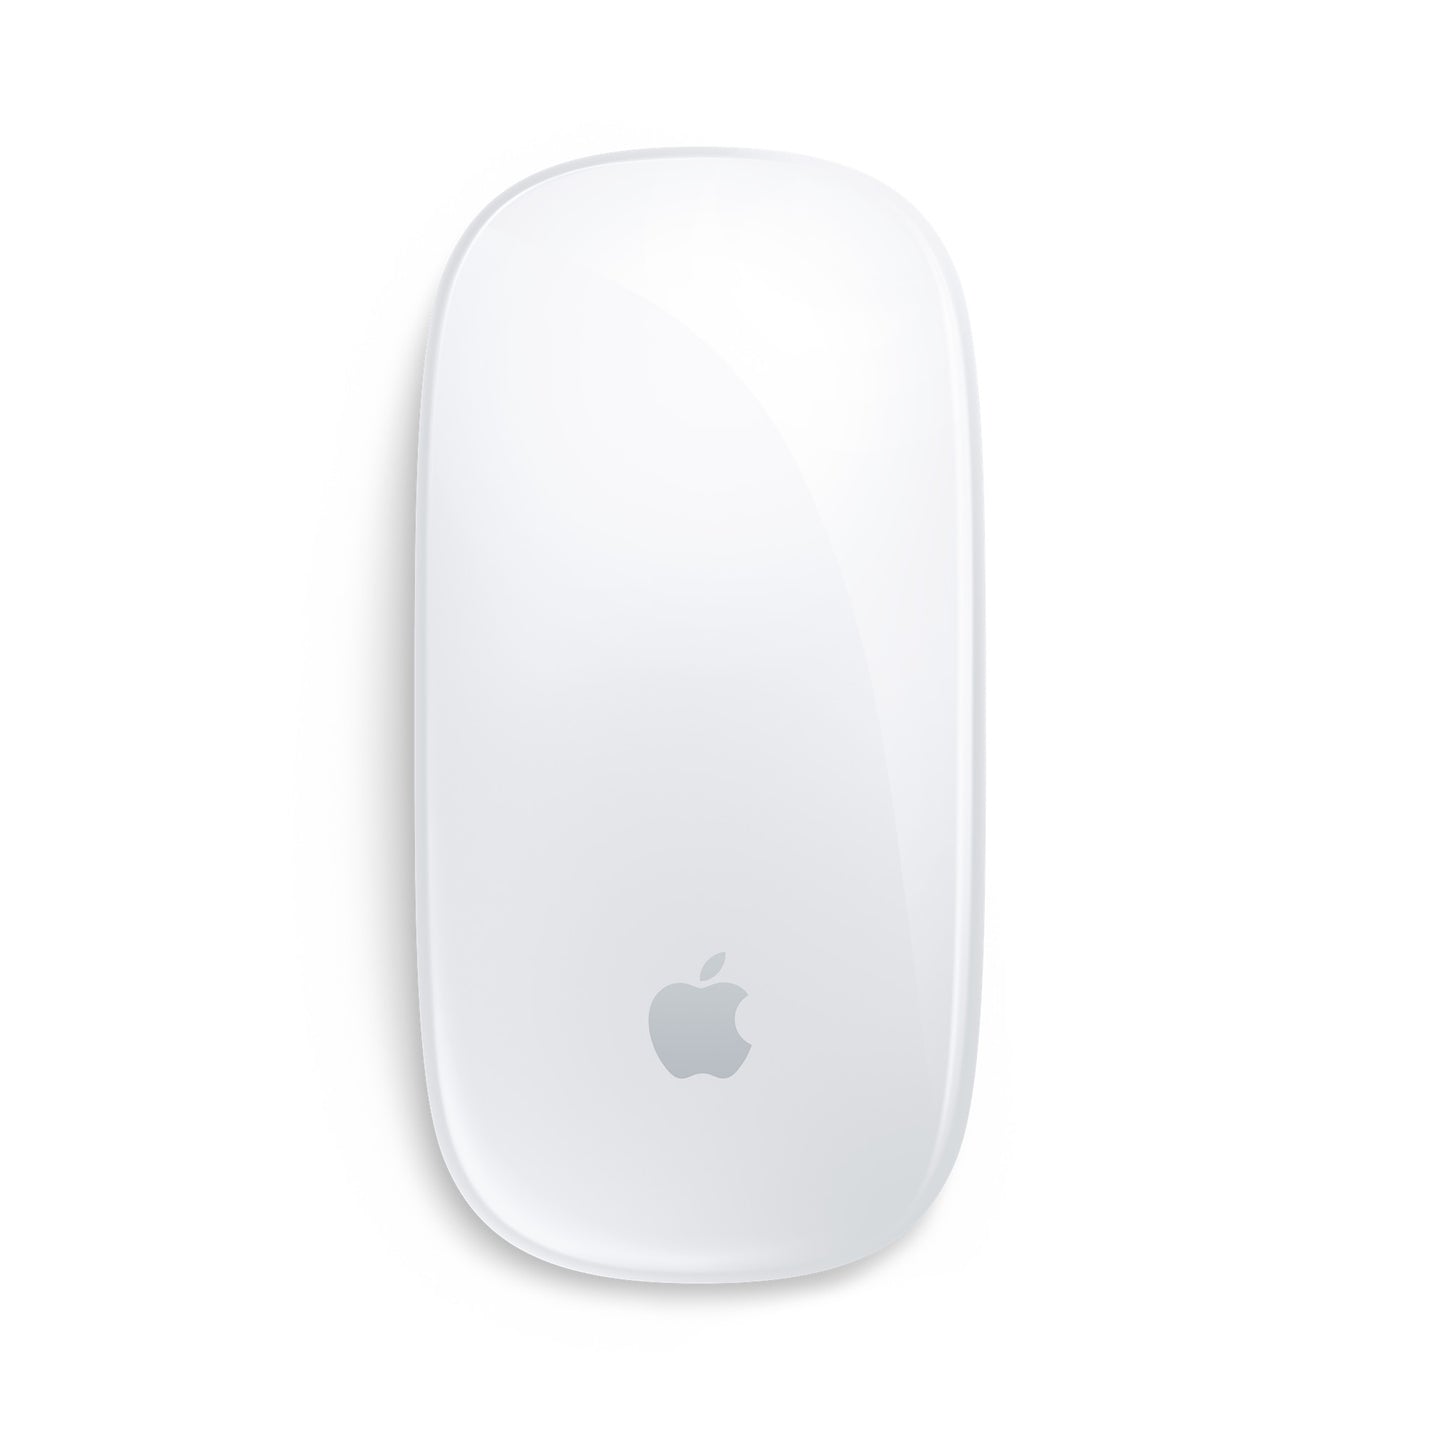 Magic Mouse - Superficie Multi-Touch blanca